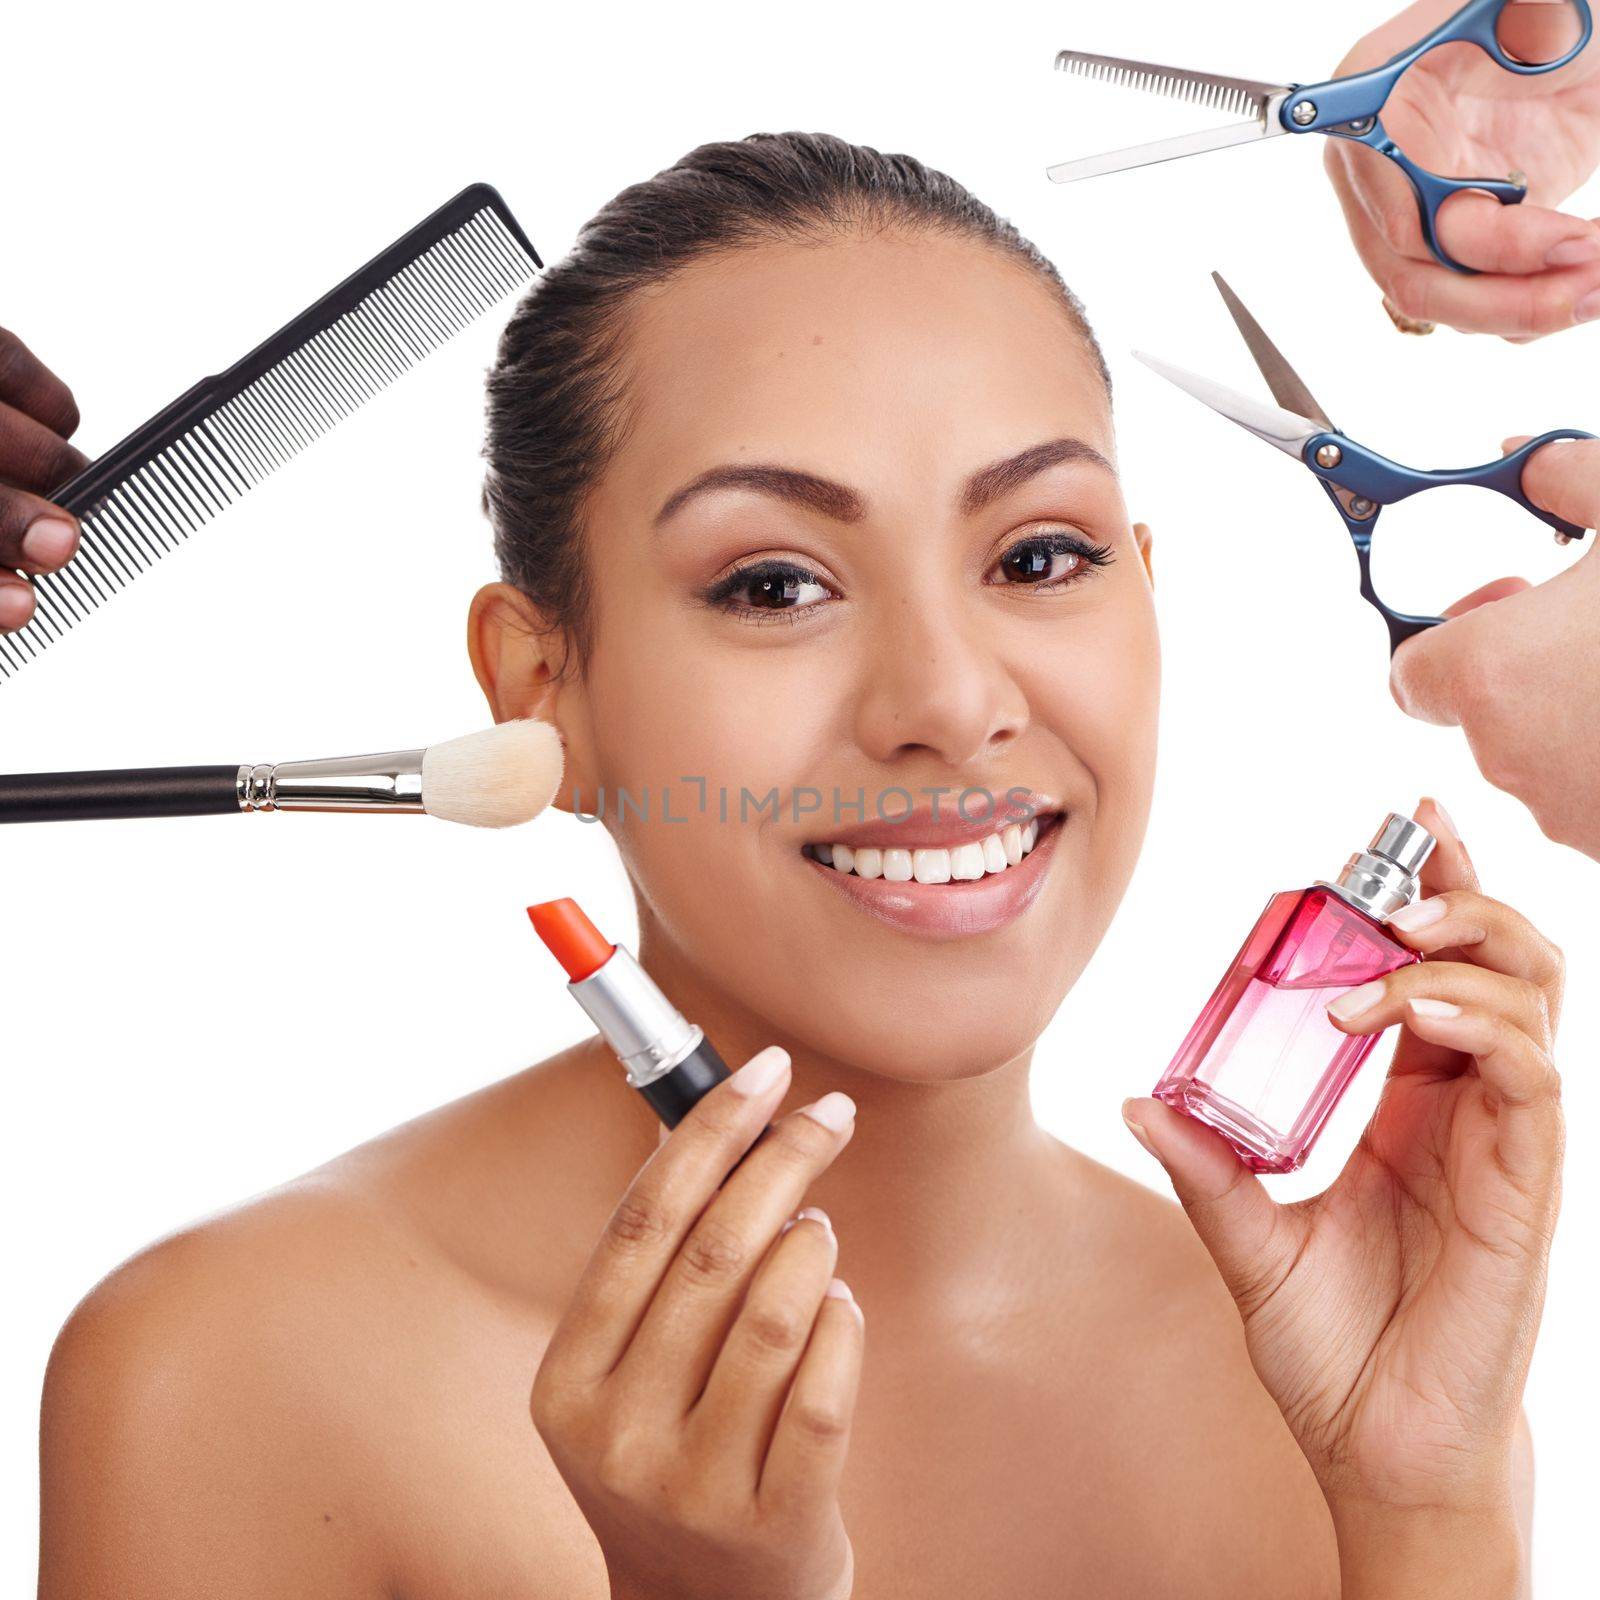 Beauty time. Studio shot of a young woman surrounded by beauty and style products